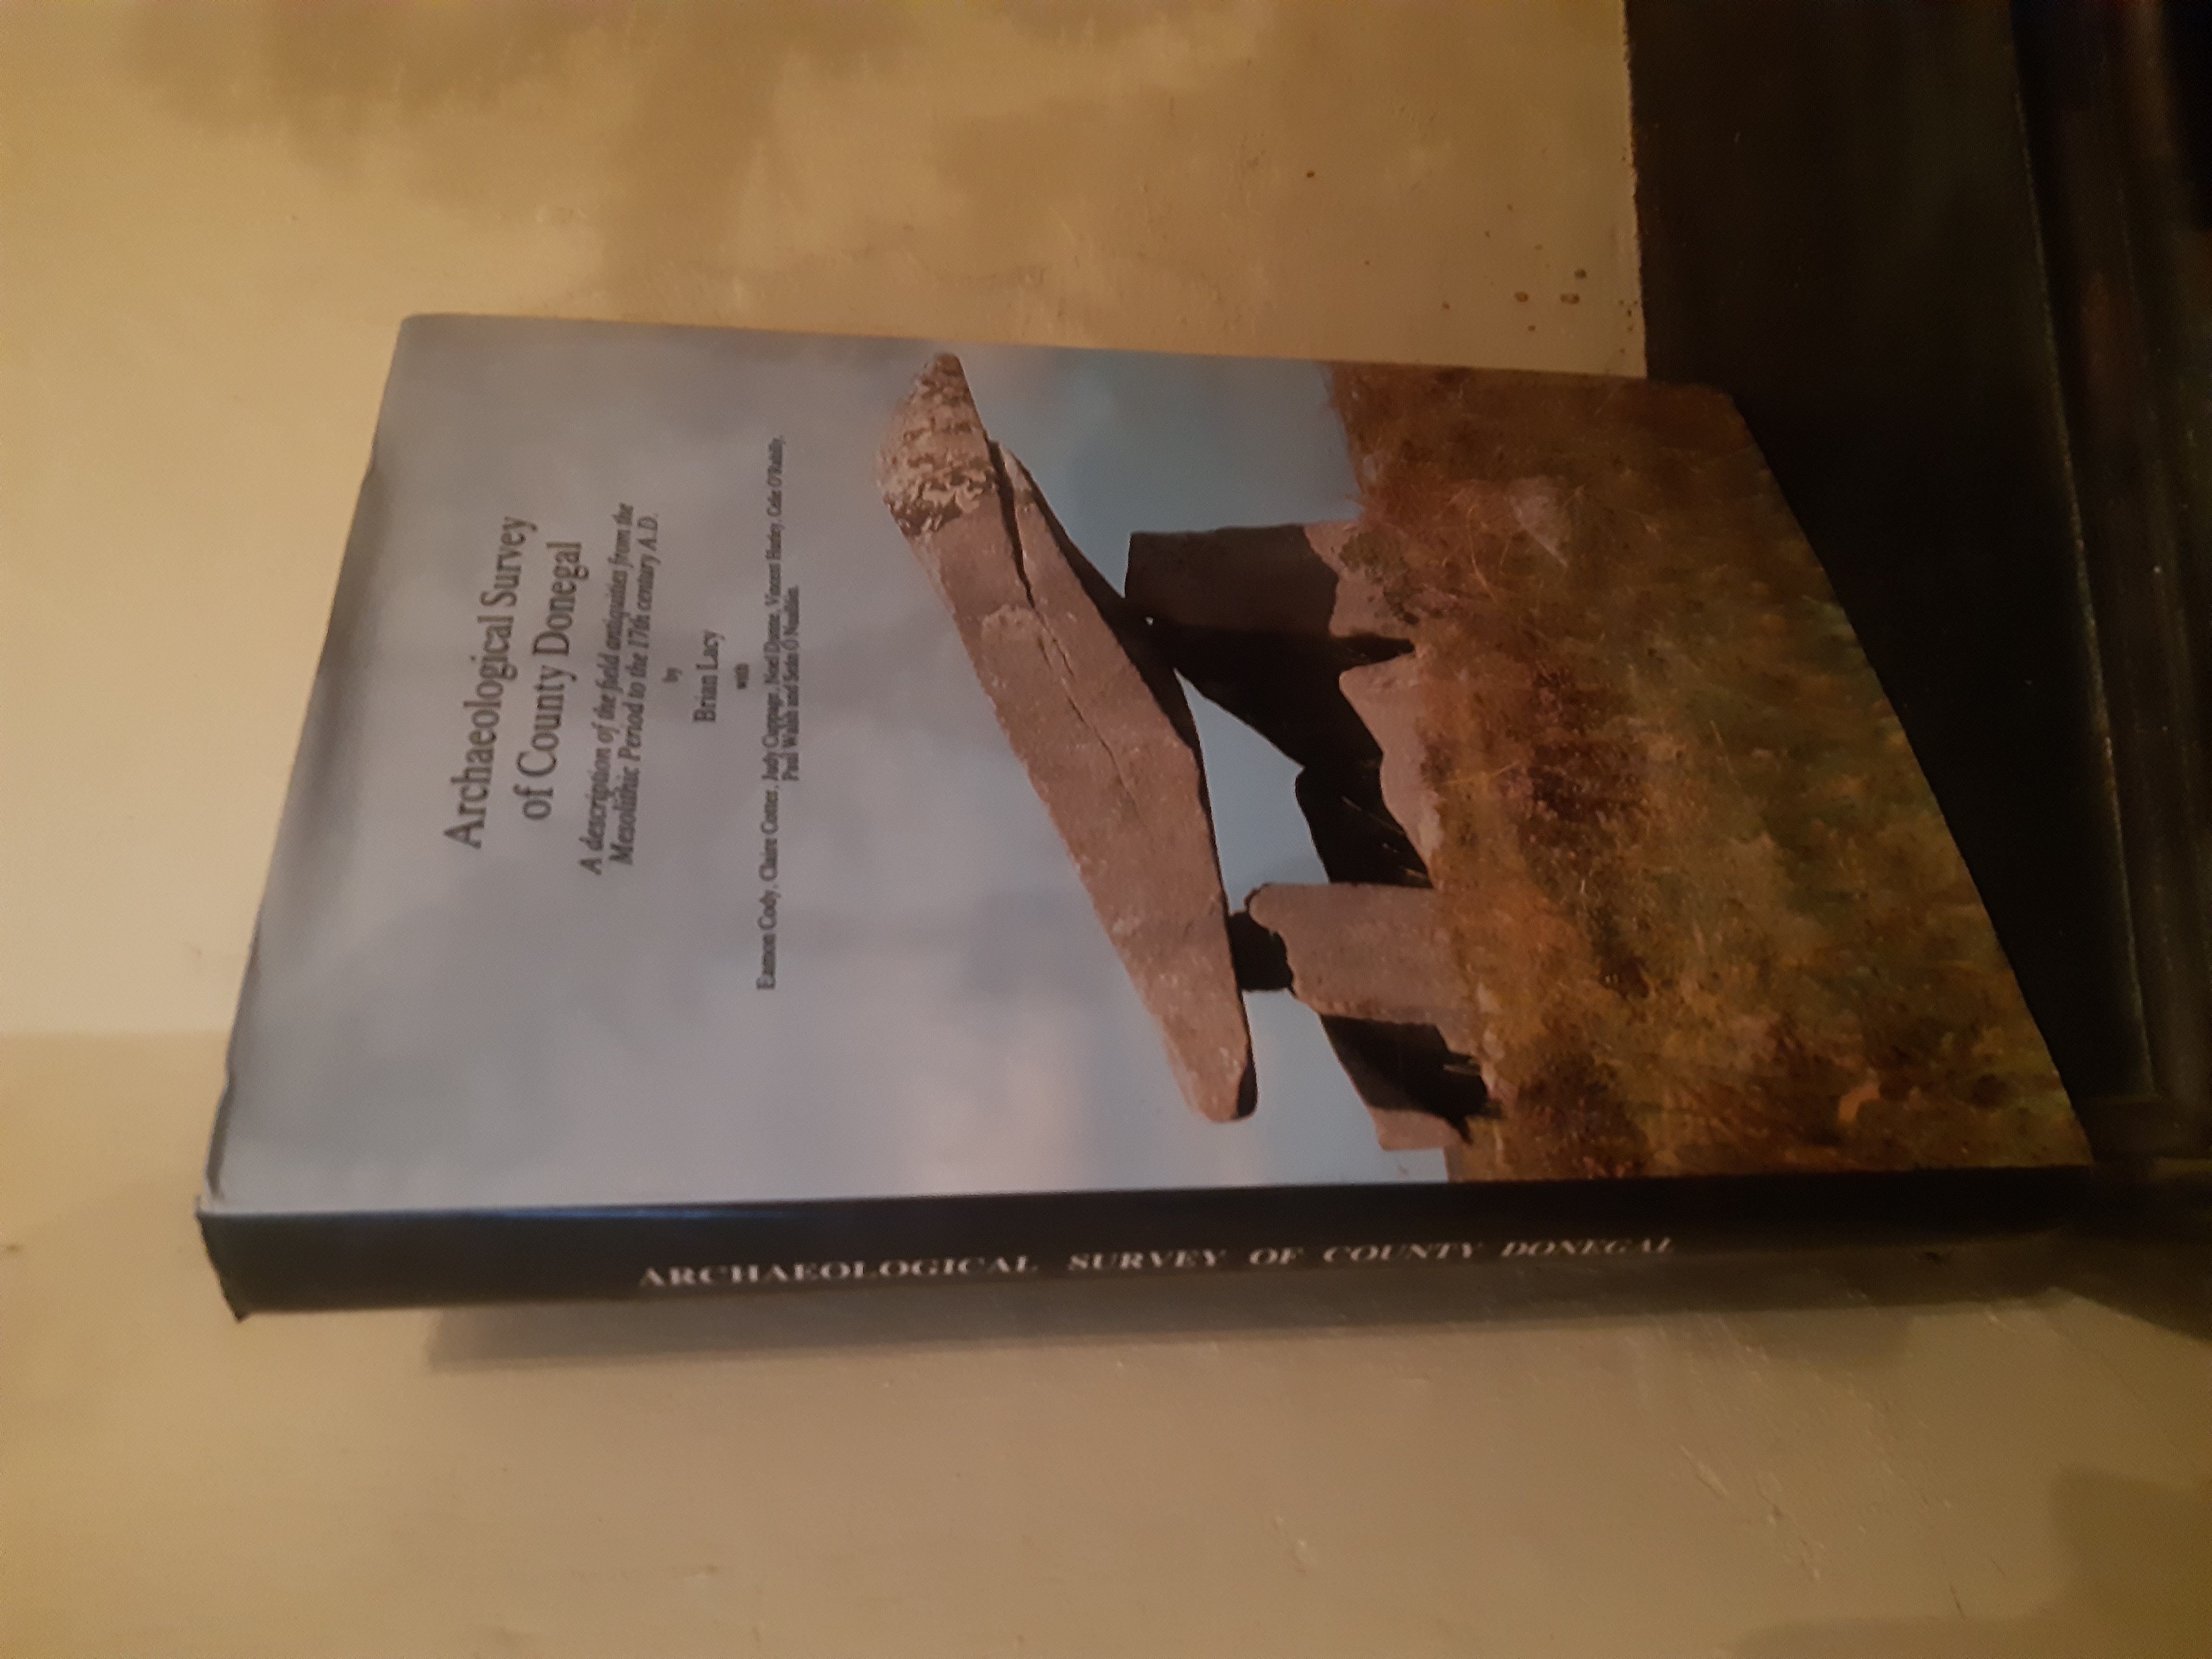 Archaeological Survey of County Donegal: A Description of the Field Antiquities of the County from the Mesolithic Period to the 17th century A.D. - Lacey, Brian